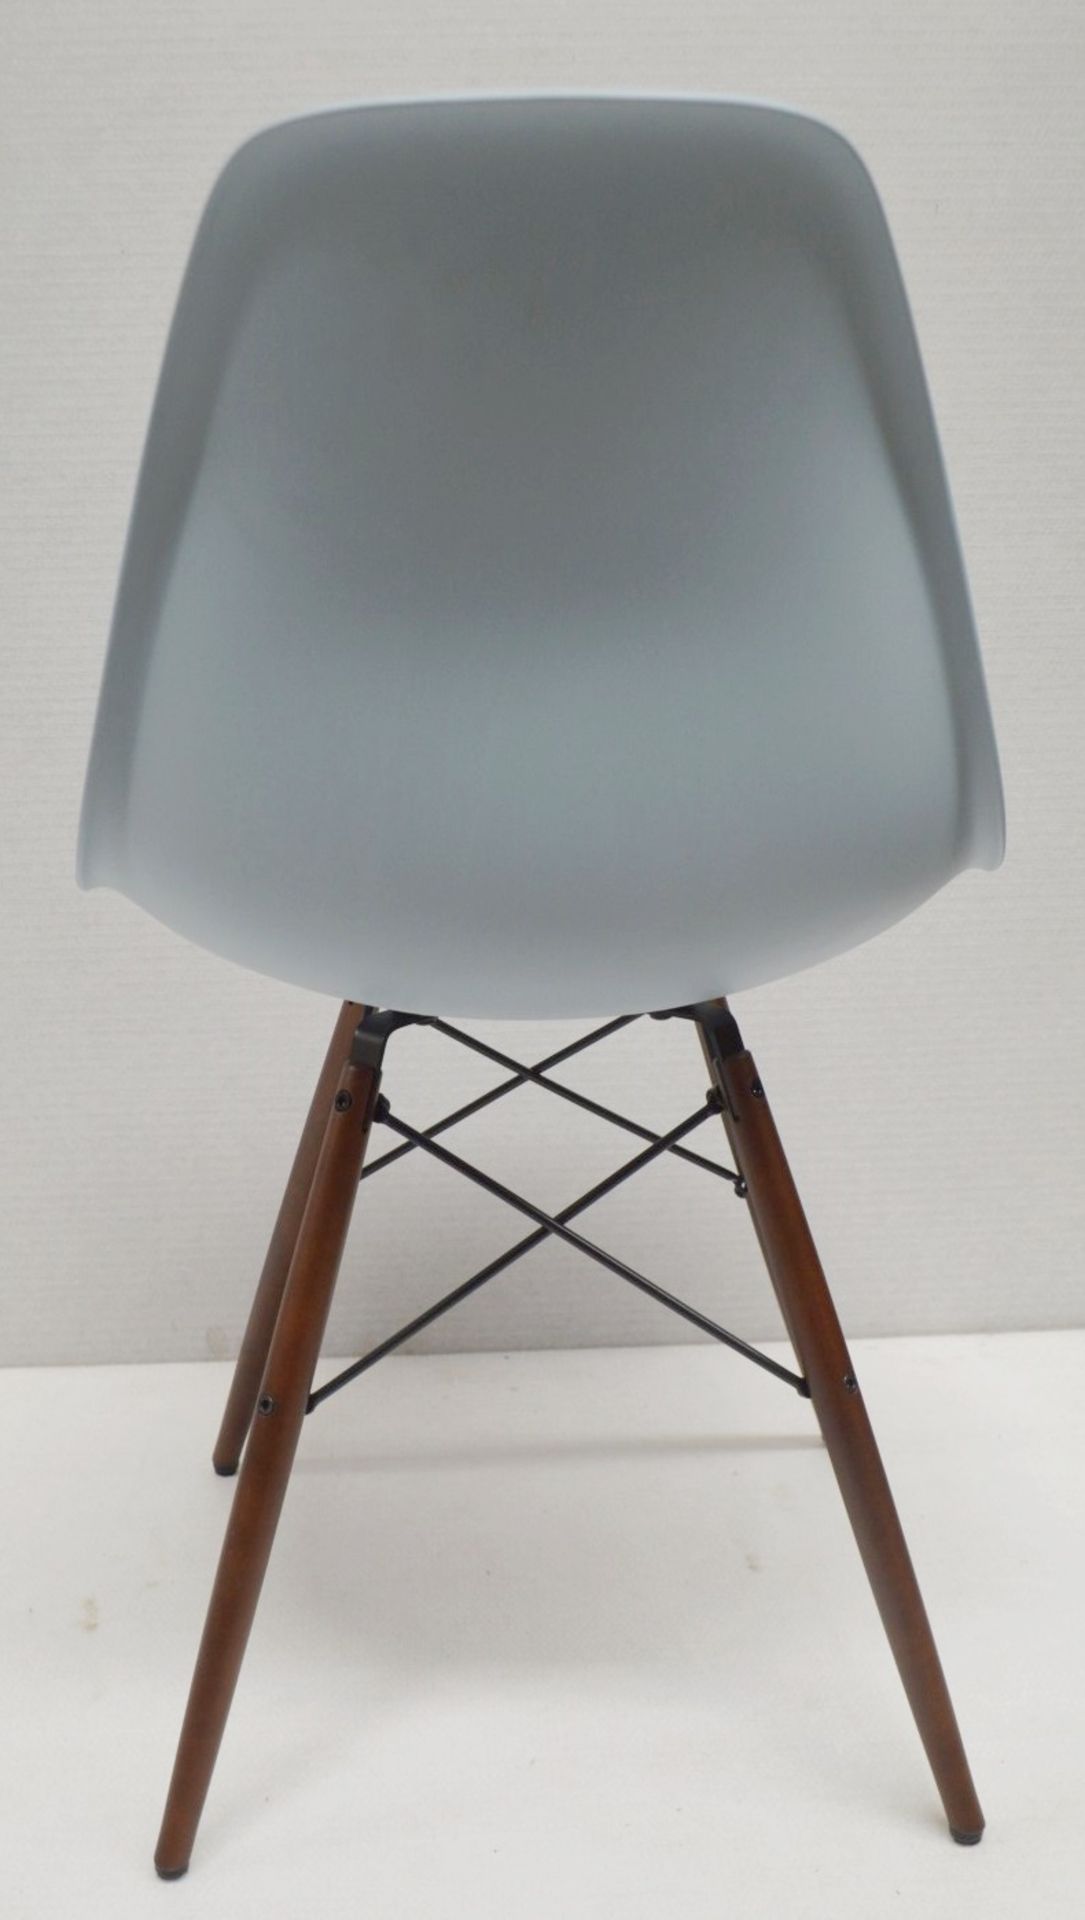 Set Of 4 x VITRA Eames DSW Designer Side Chairs With Upholsted Seats And Maple Bases In A Dark Stain - Image 8 of 11